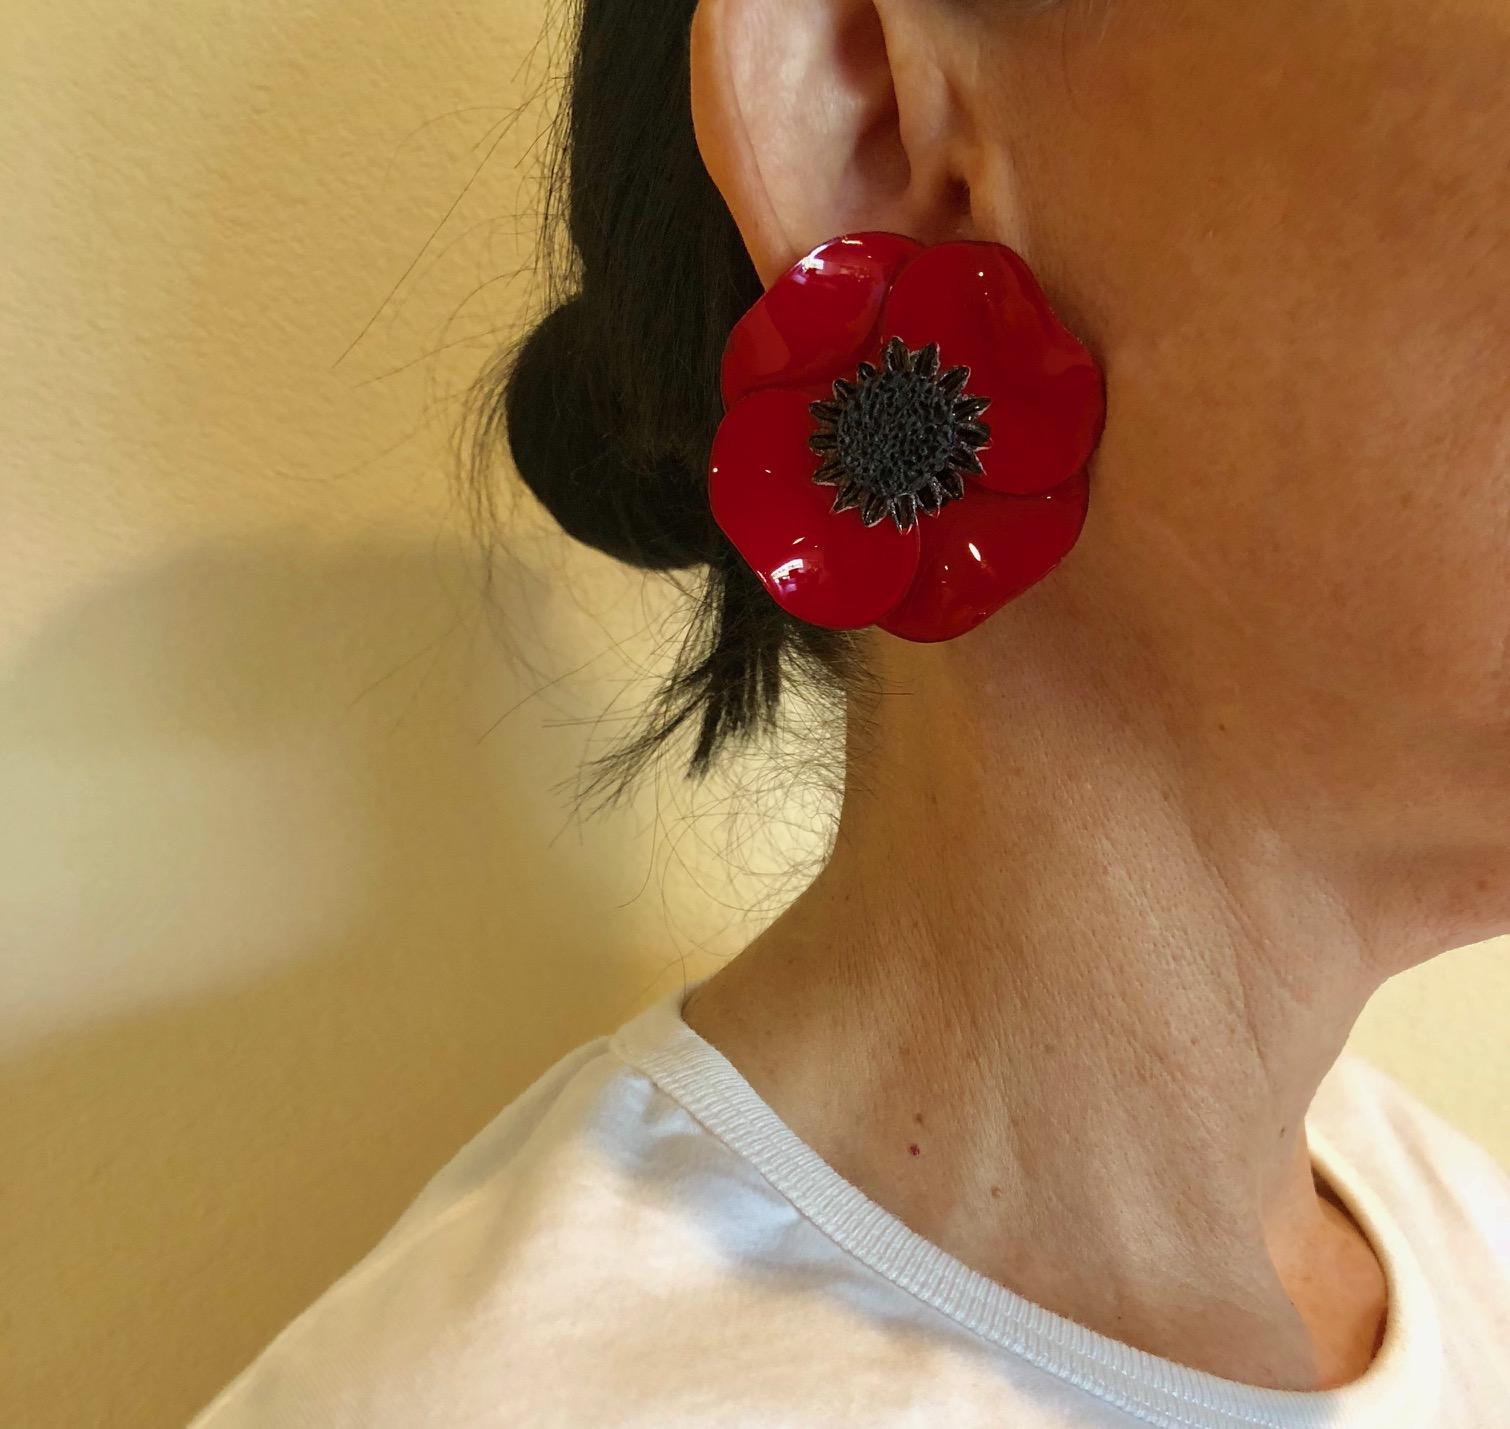 Light and easy to wear, these handmade artisanal clip-on earrings were made in Paris by Cilea.  The lightweight clip-on earrings feature a single architectural enameline (enamel and resin composite) red poppy flower. The poppies are oversized and